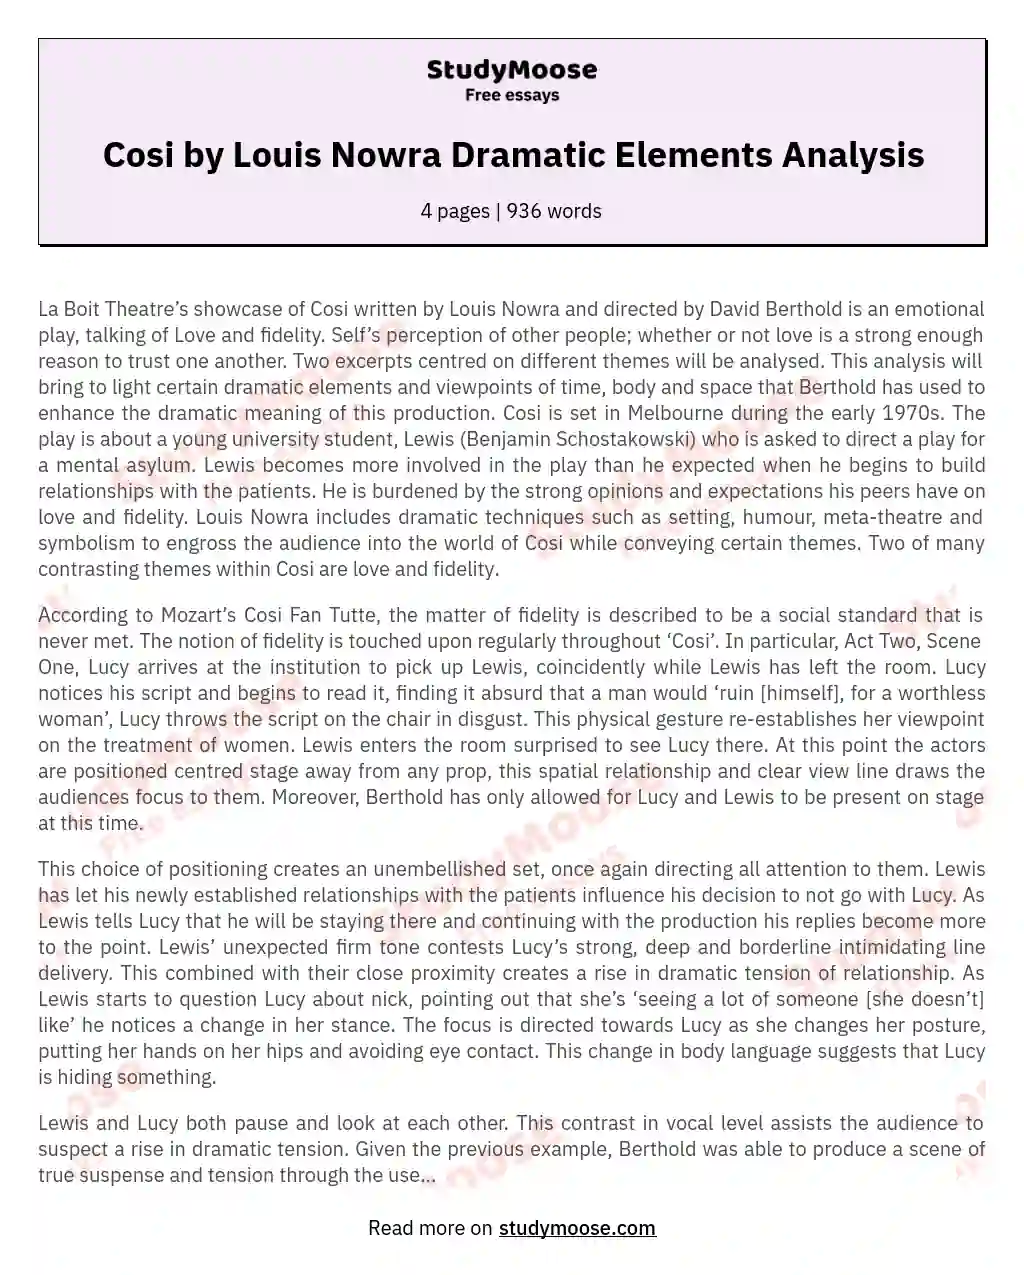 Cosi by Louis Nowra Dramatic Elements Analysis essay